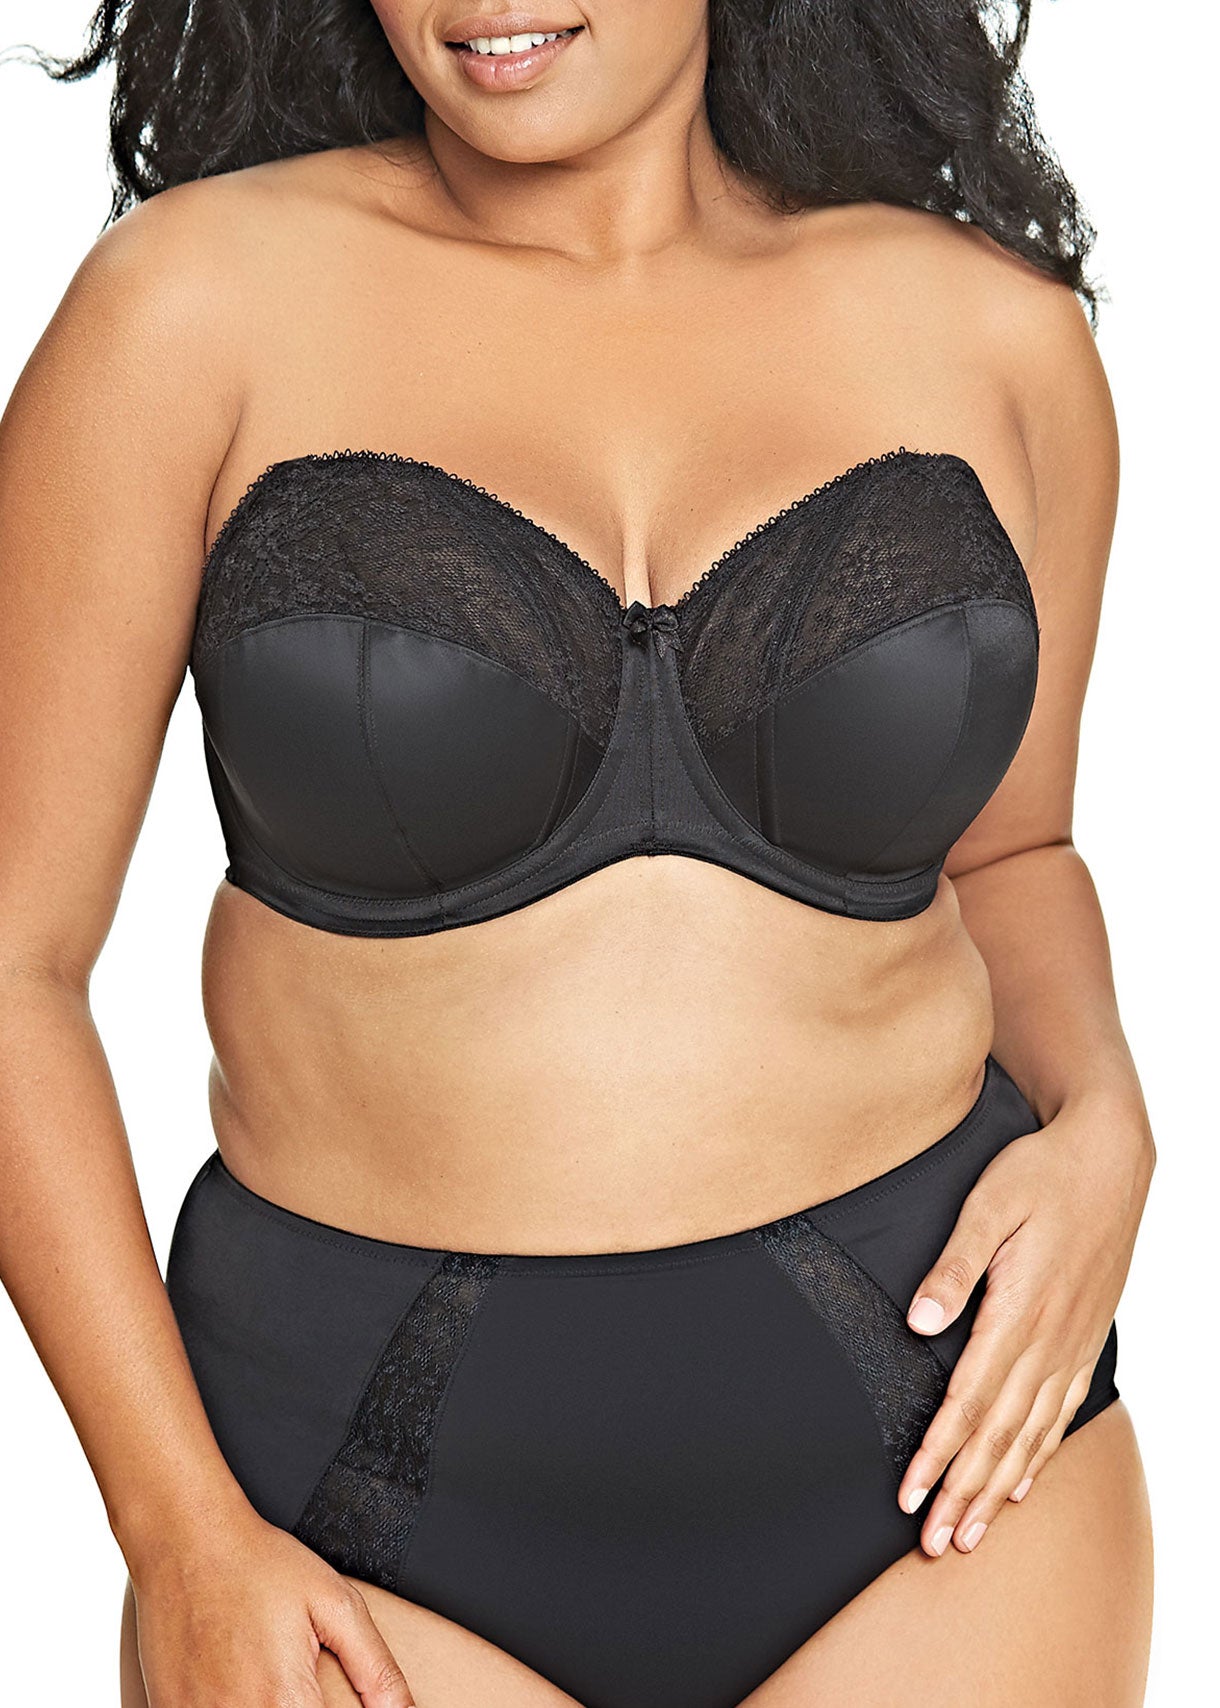 Adelaide Strapless Underwire Cathedral Bra In Black By Goddess - 32-46 Bands DD-HH (UK sizes)